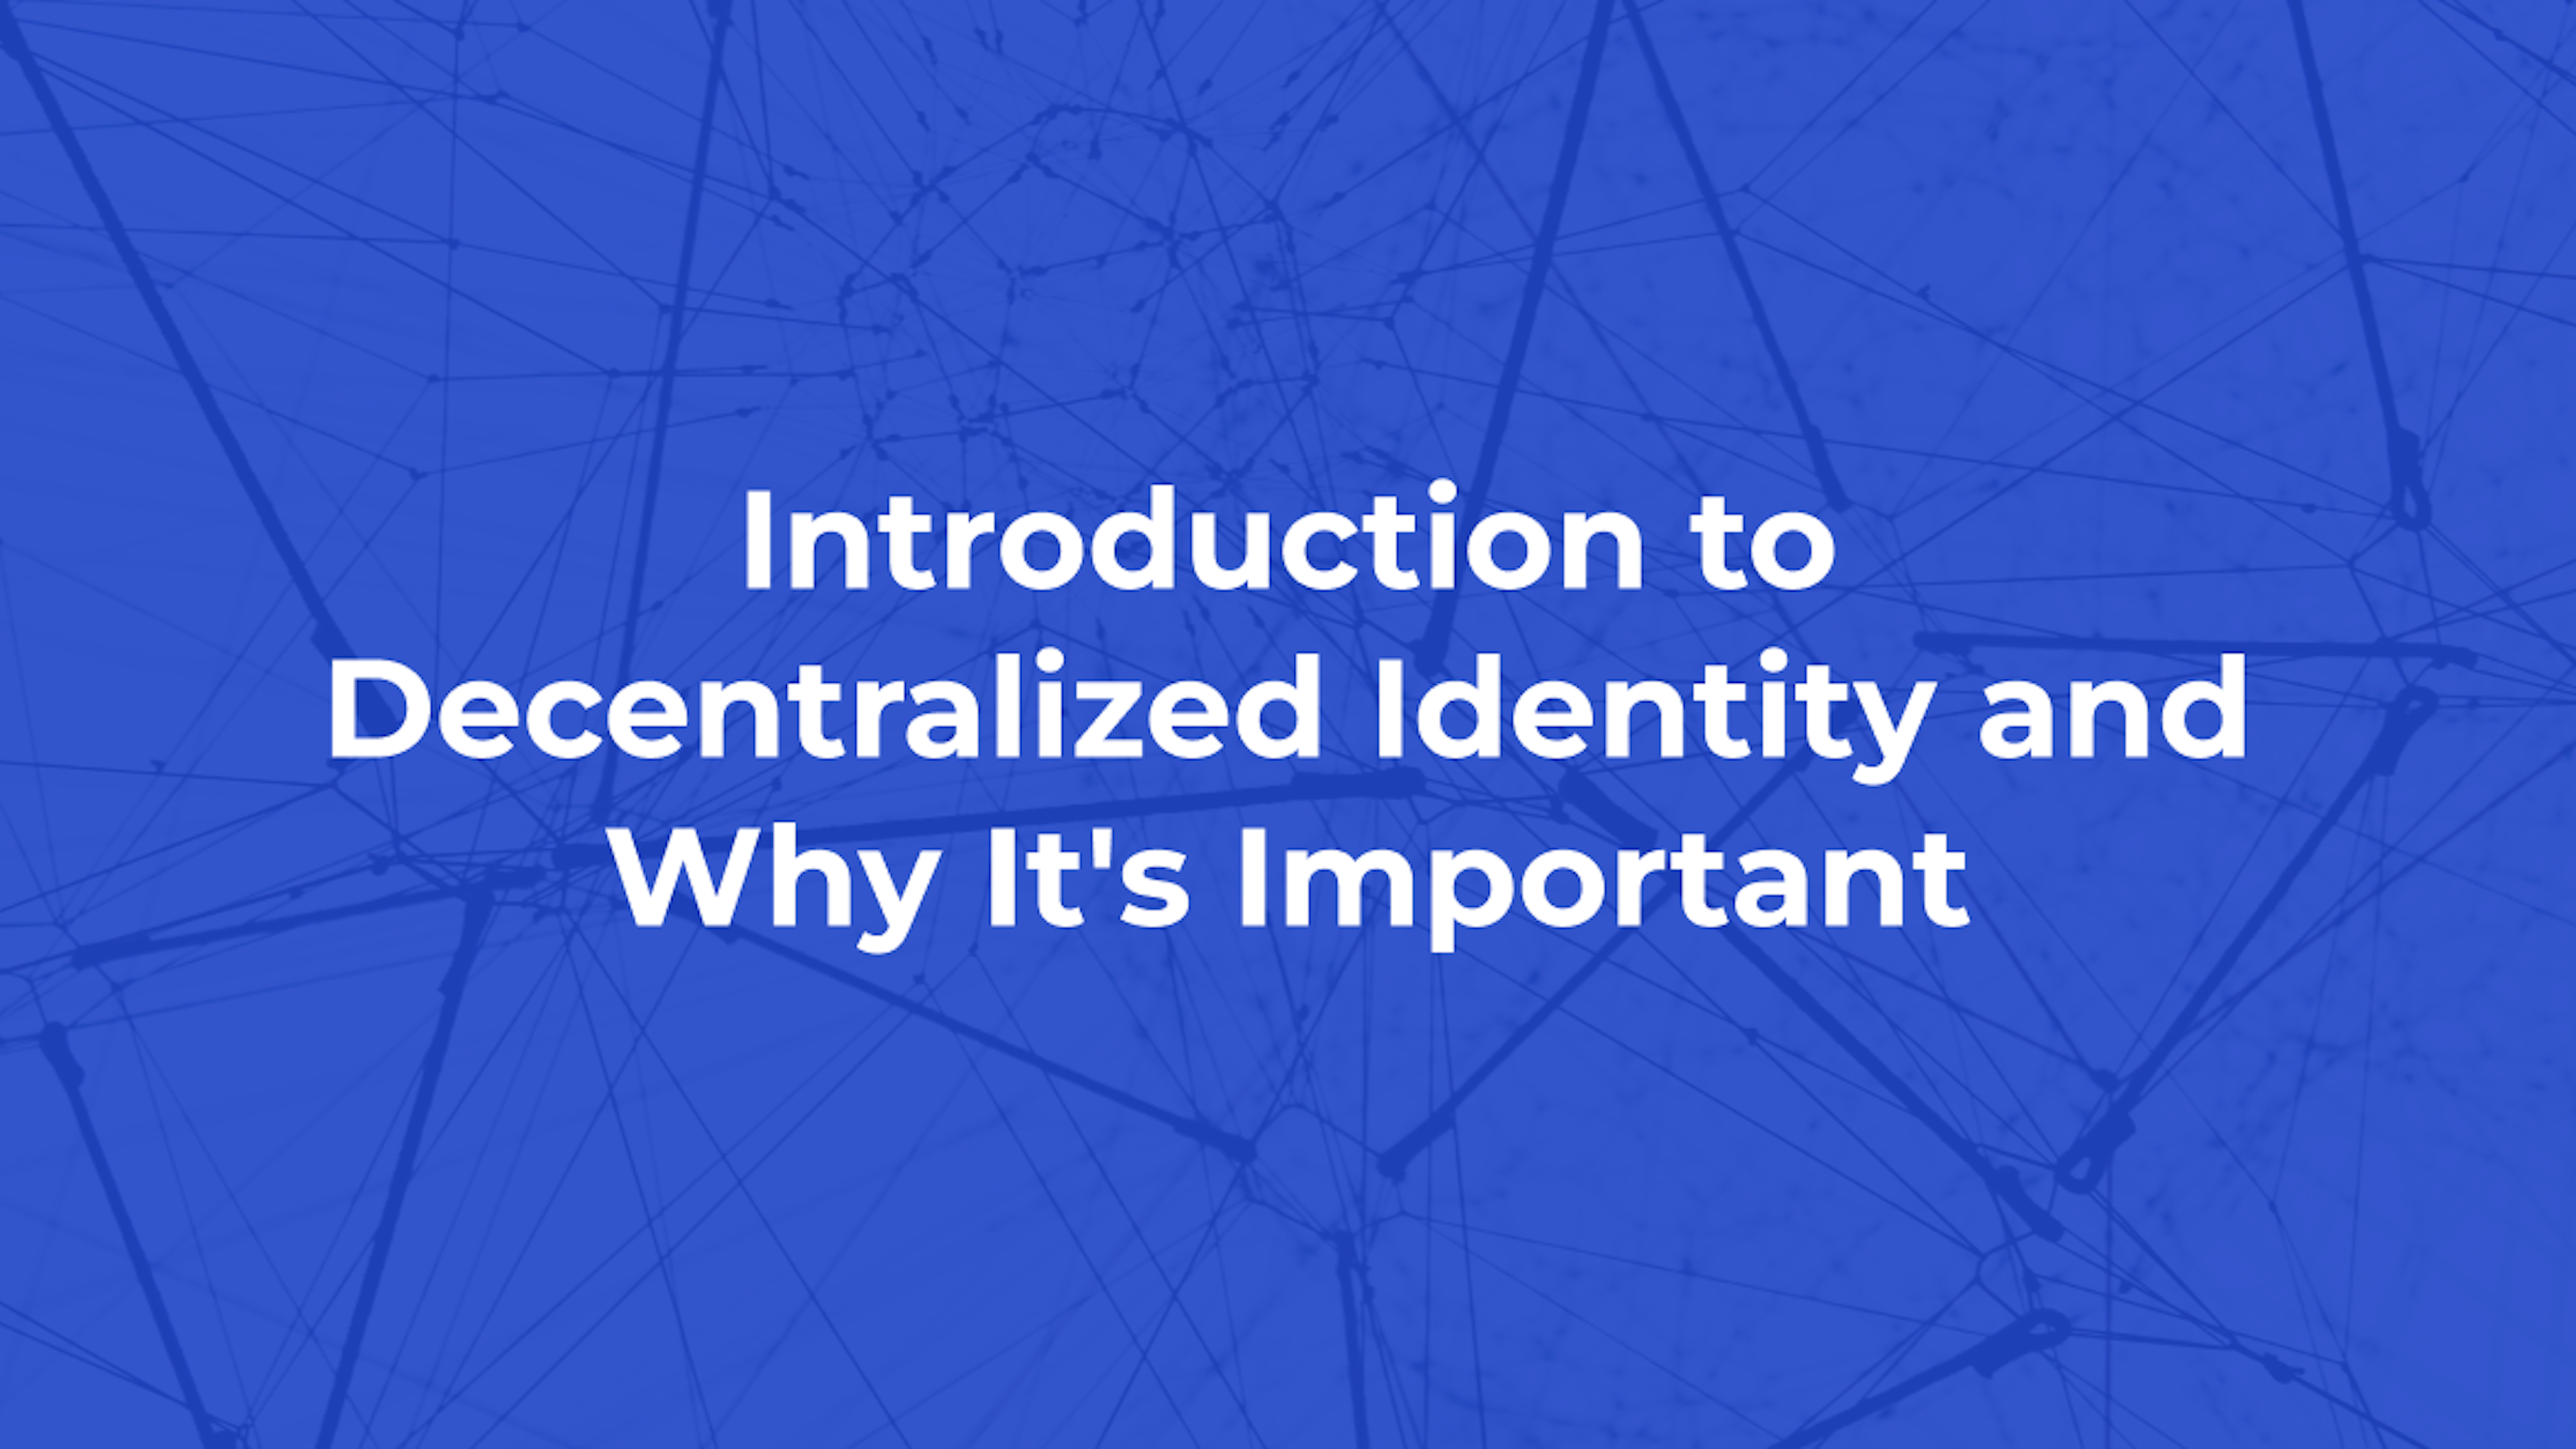 Introduction to Decentralized Identity and Why It's Important